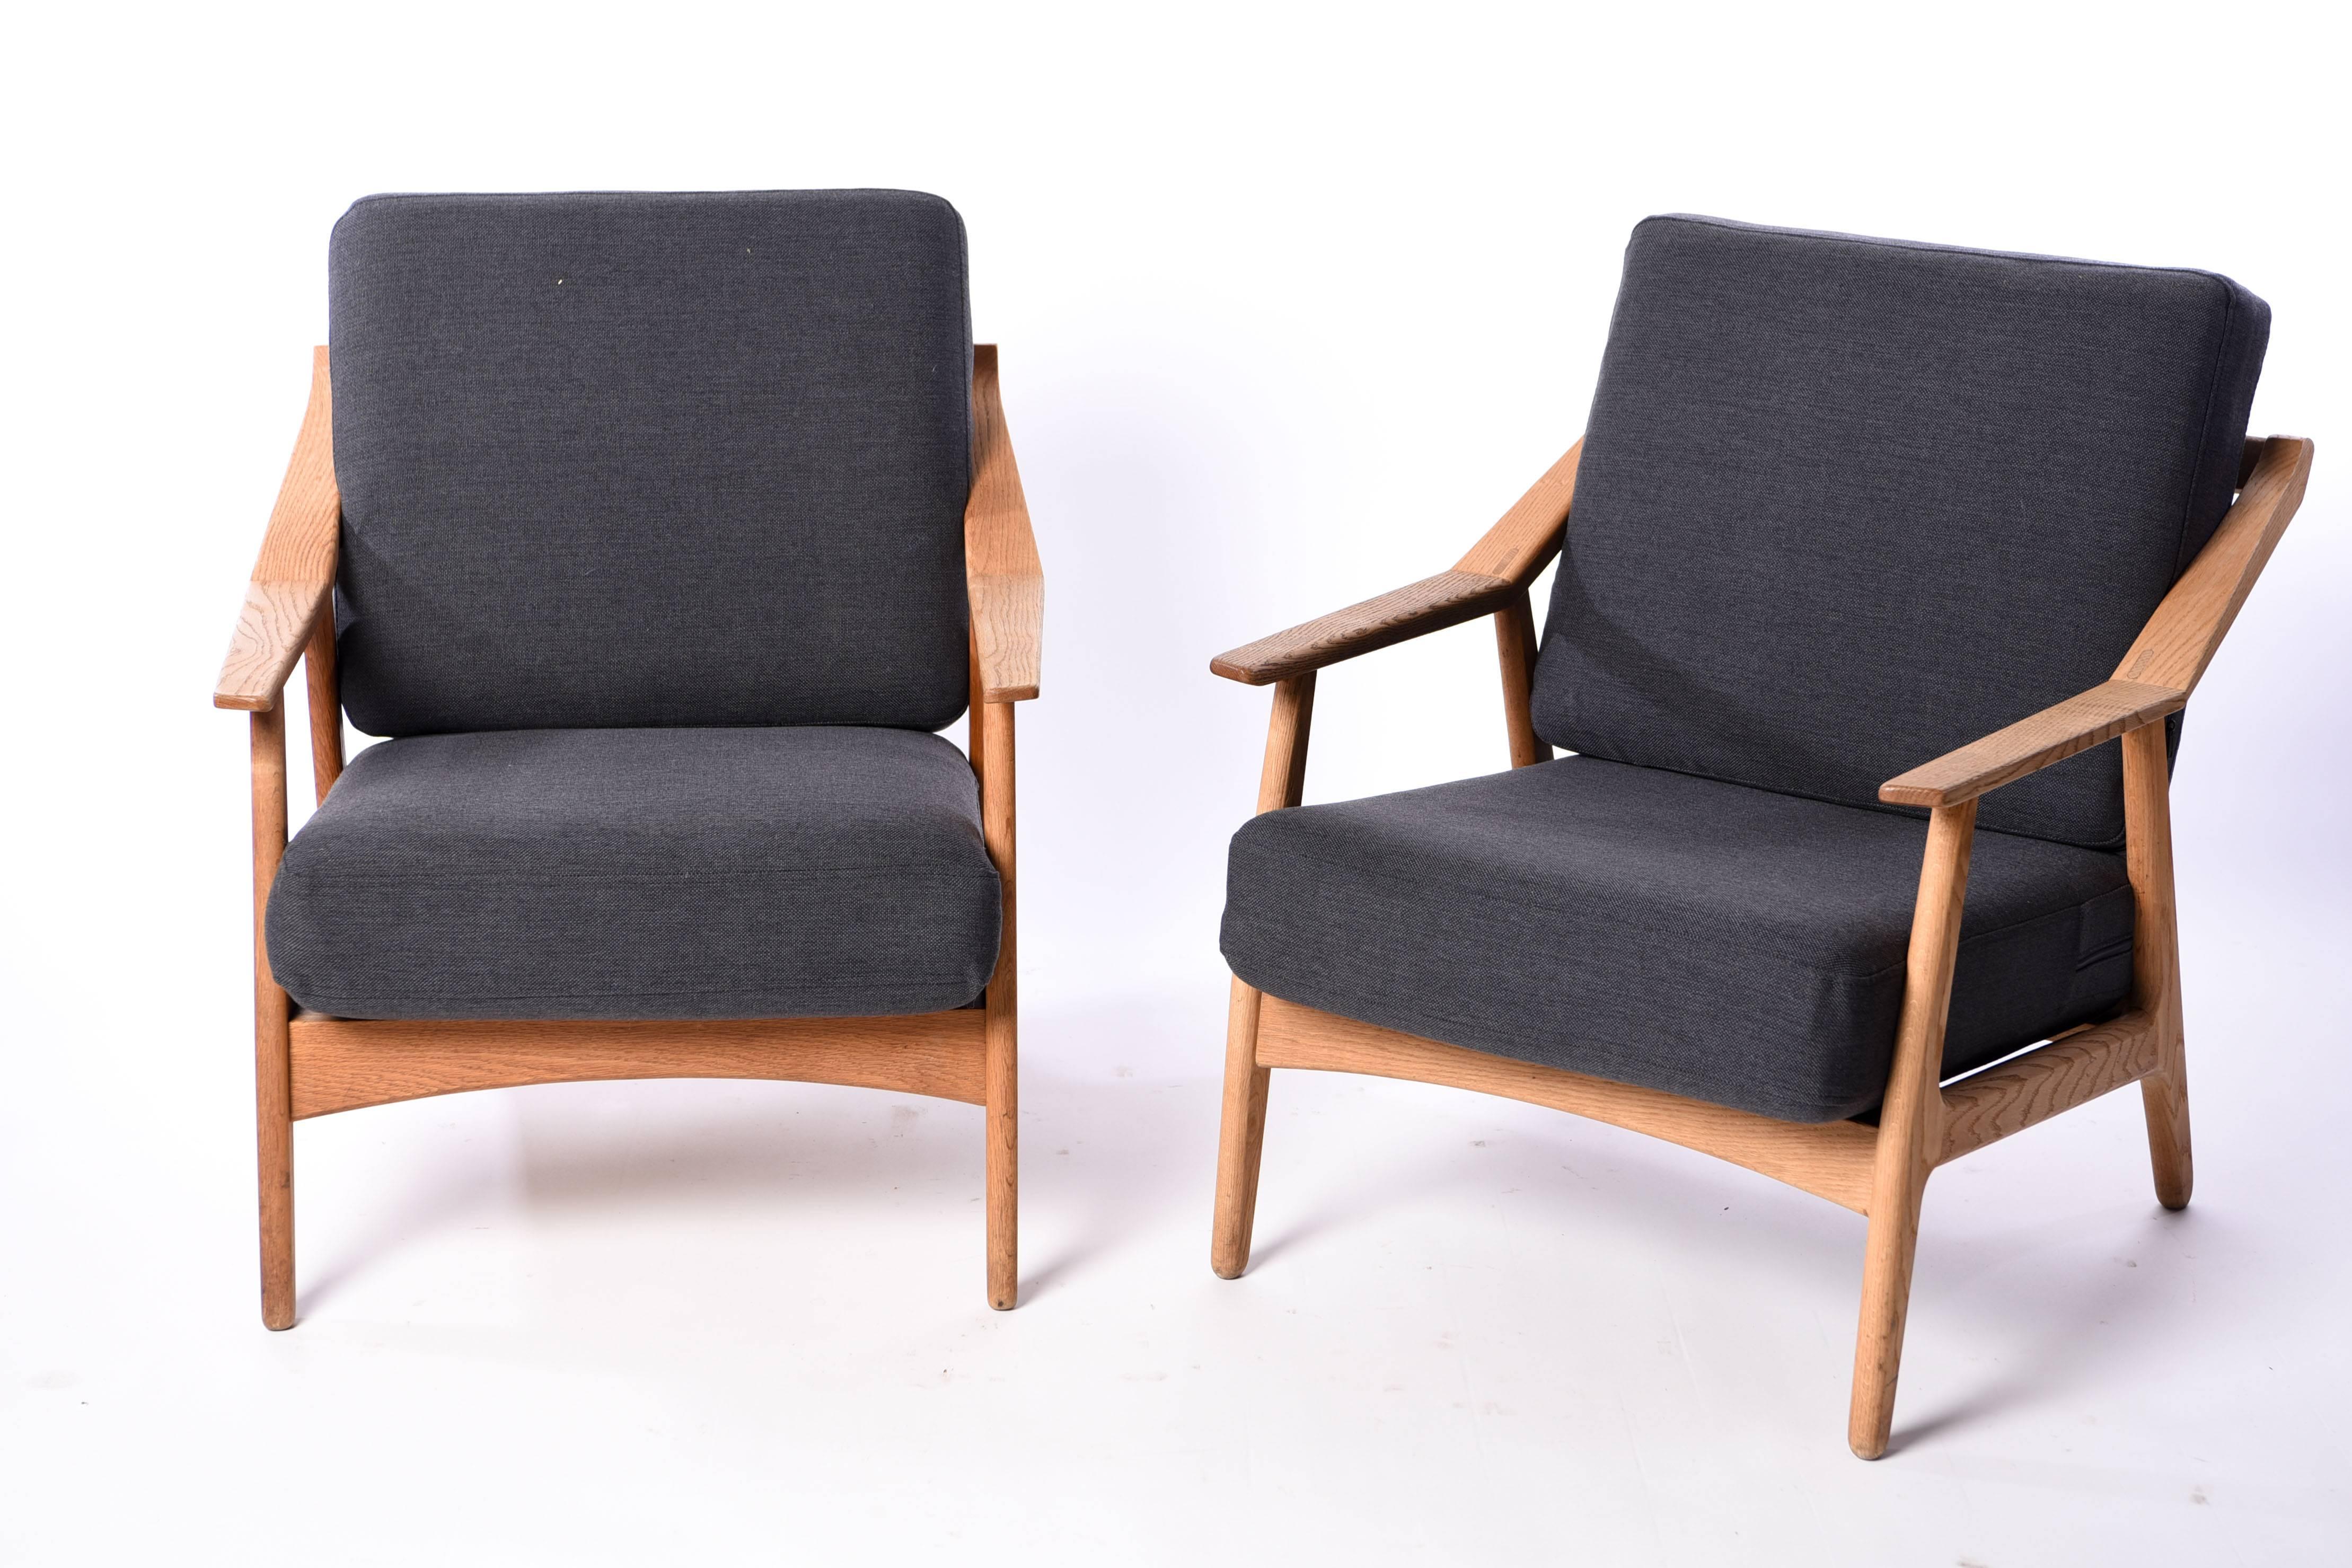 This is a fabulous pair of easy chairs designed by Kurt Ostervig. They feature oak frames and have been newly upholstered in a lovely gray color that juxtaposes well against the lighter wood. A great example of Danish design, circa 1950s.